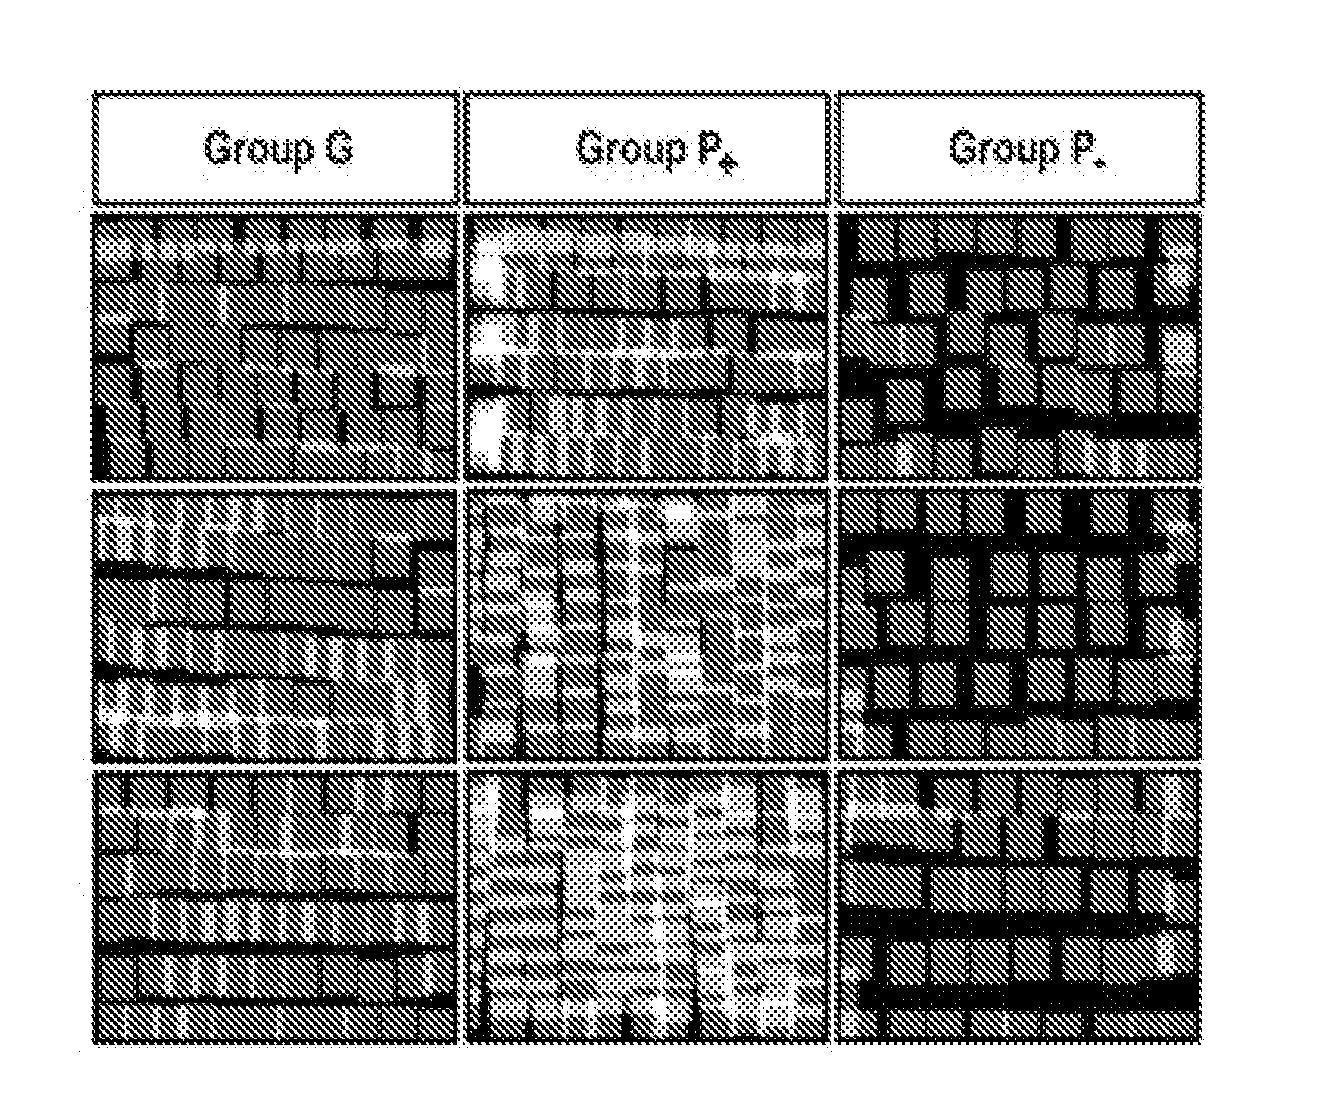 System and method for evaluating laser treatment